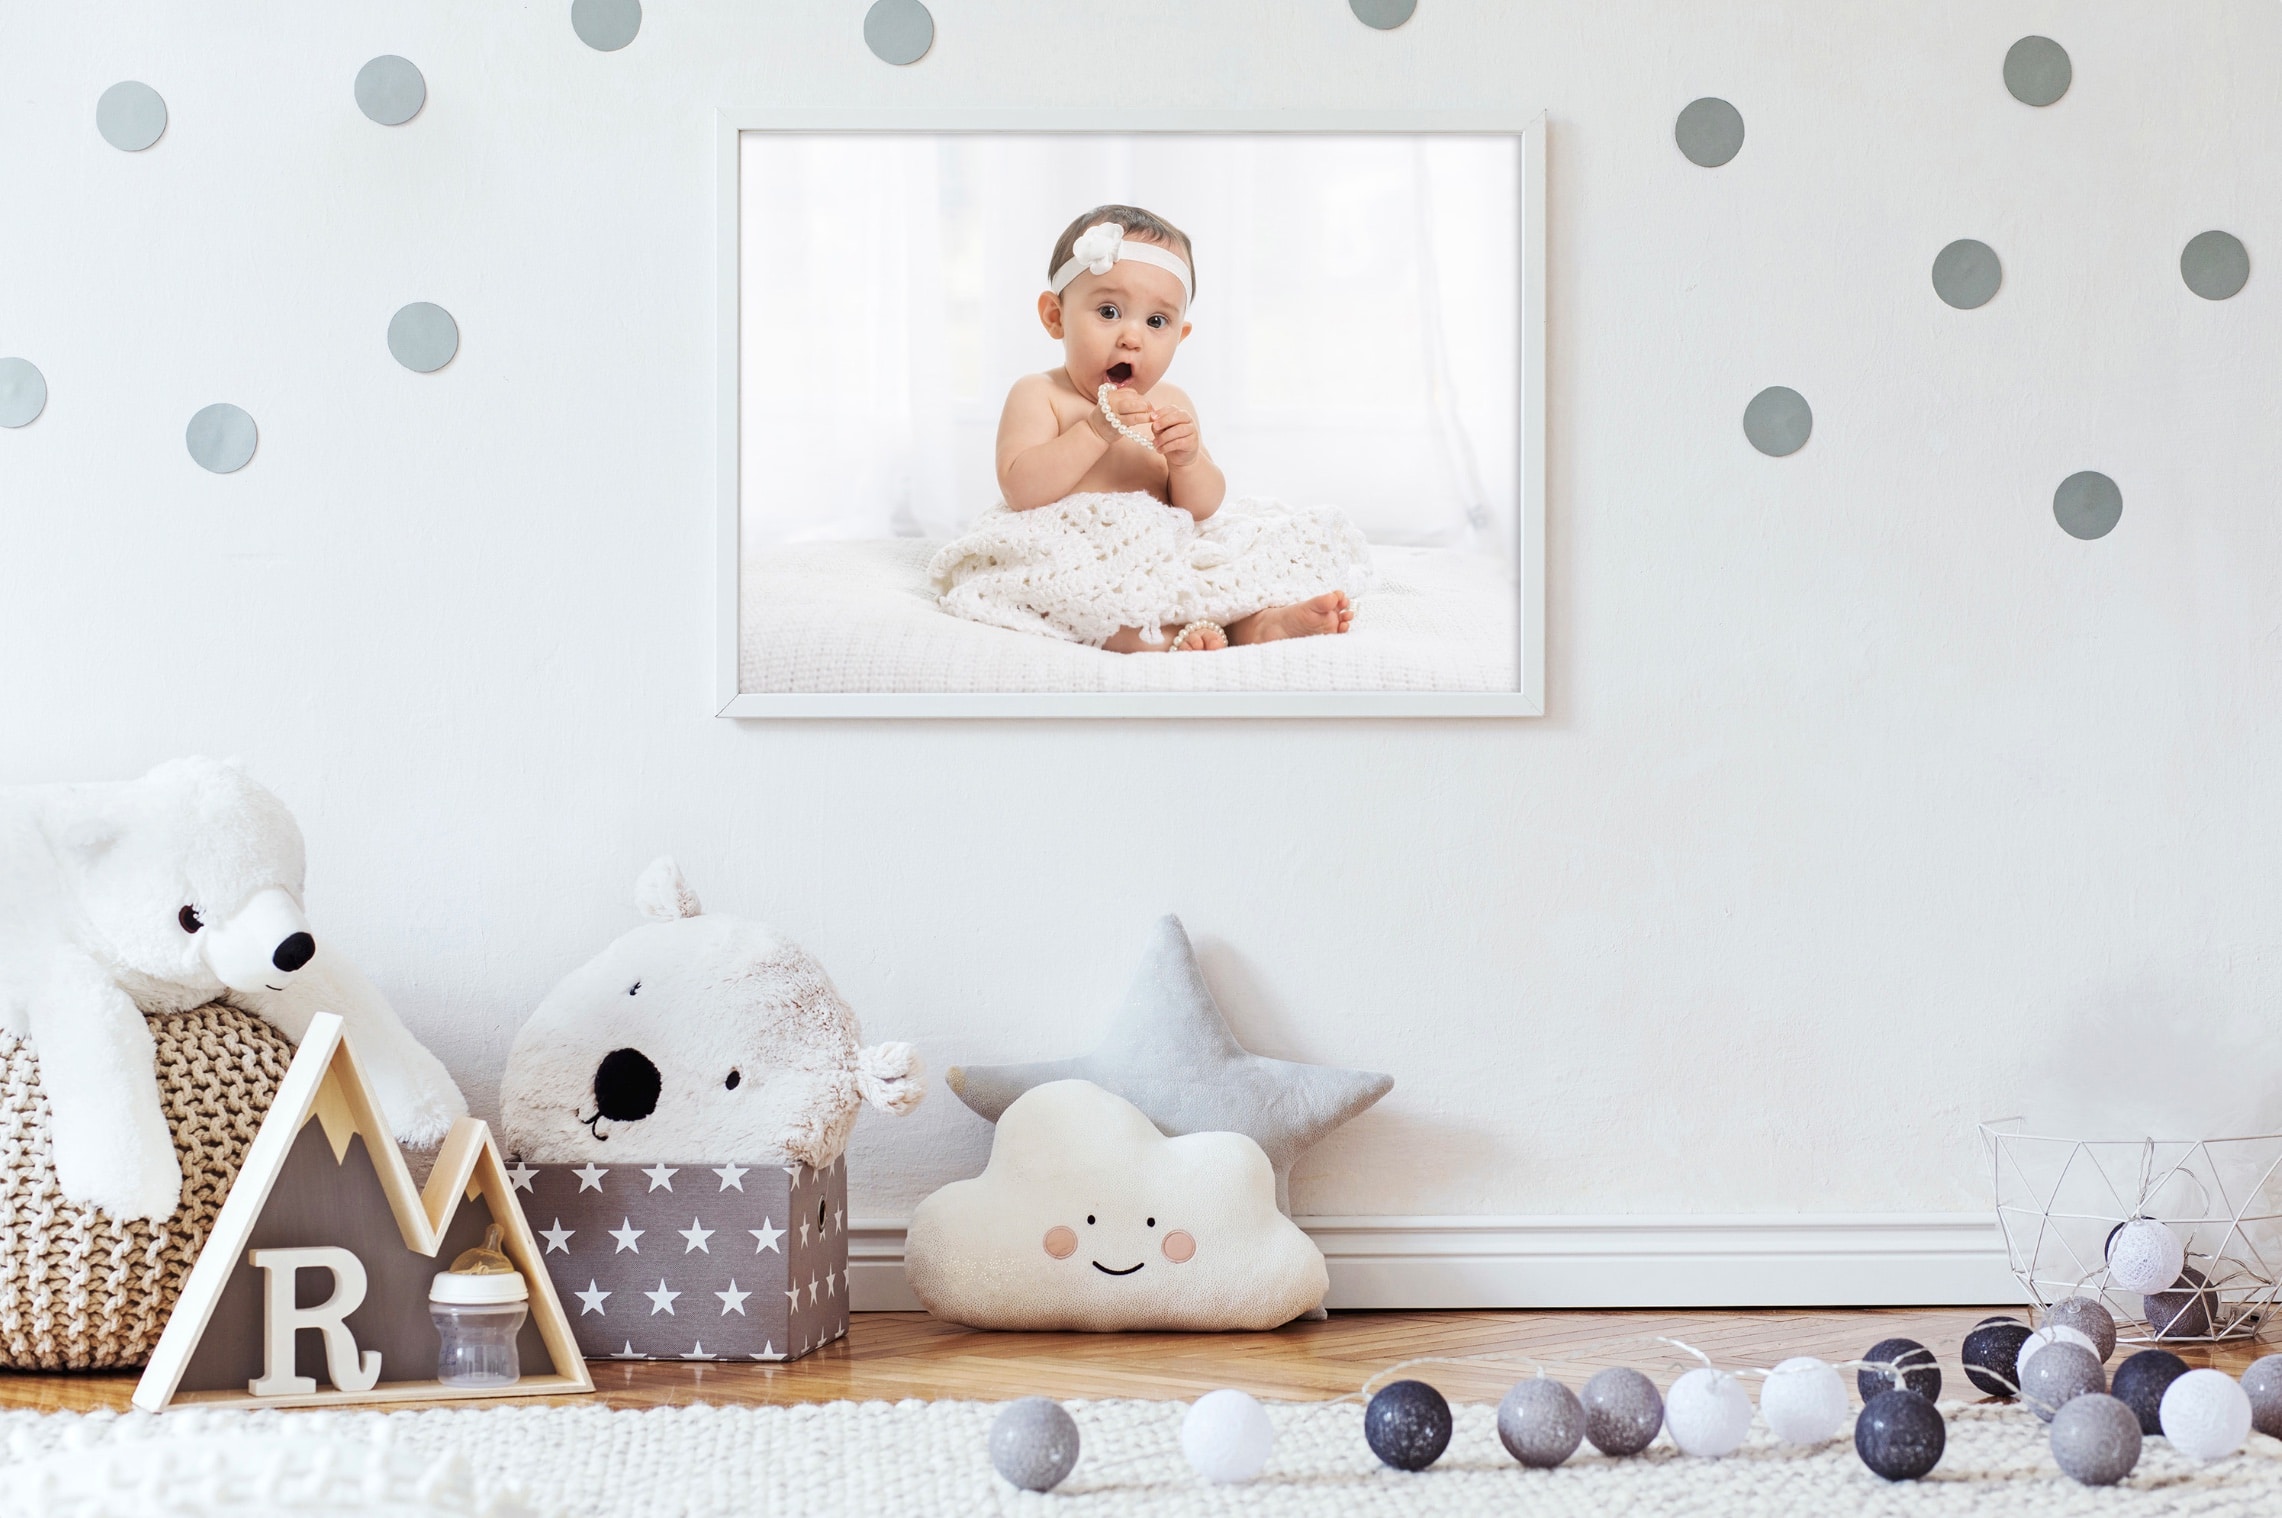 Portrait of a baby hanging on the wall in a kid's room